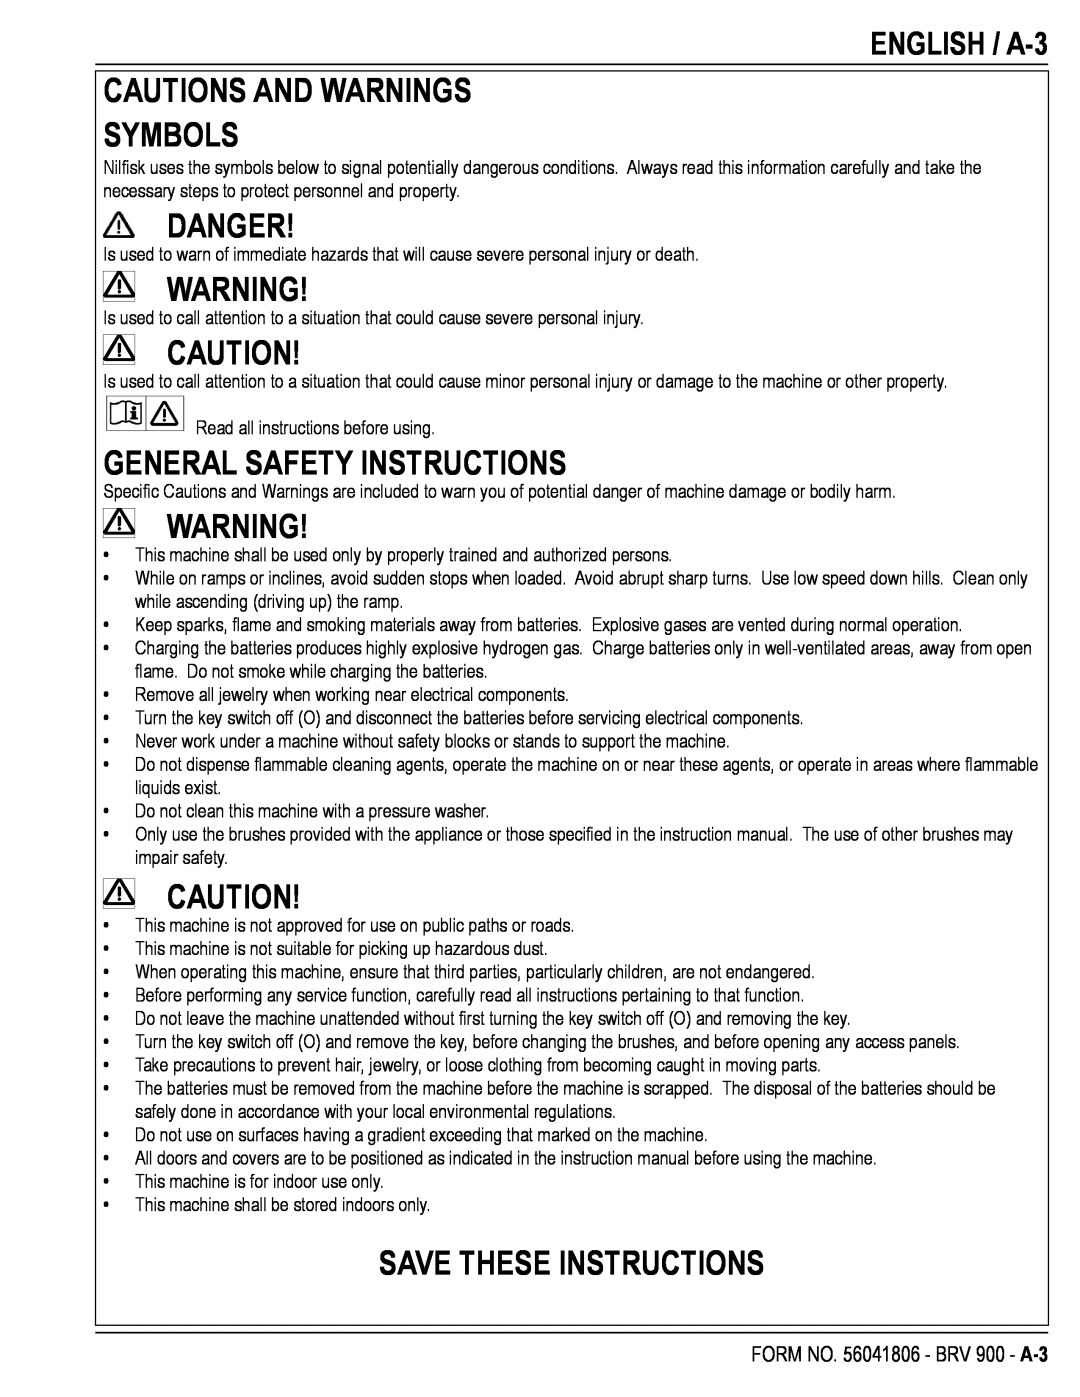 Nilfisk-Advance America BRV 900 manual Cautions And Warnings Symbols, Danger, General Safety Instructions, ENGLISH / A-3 